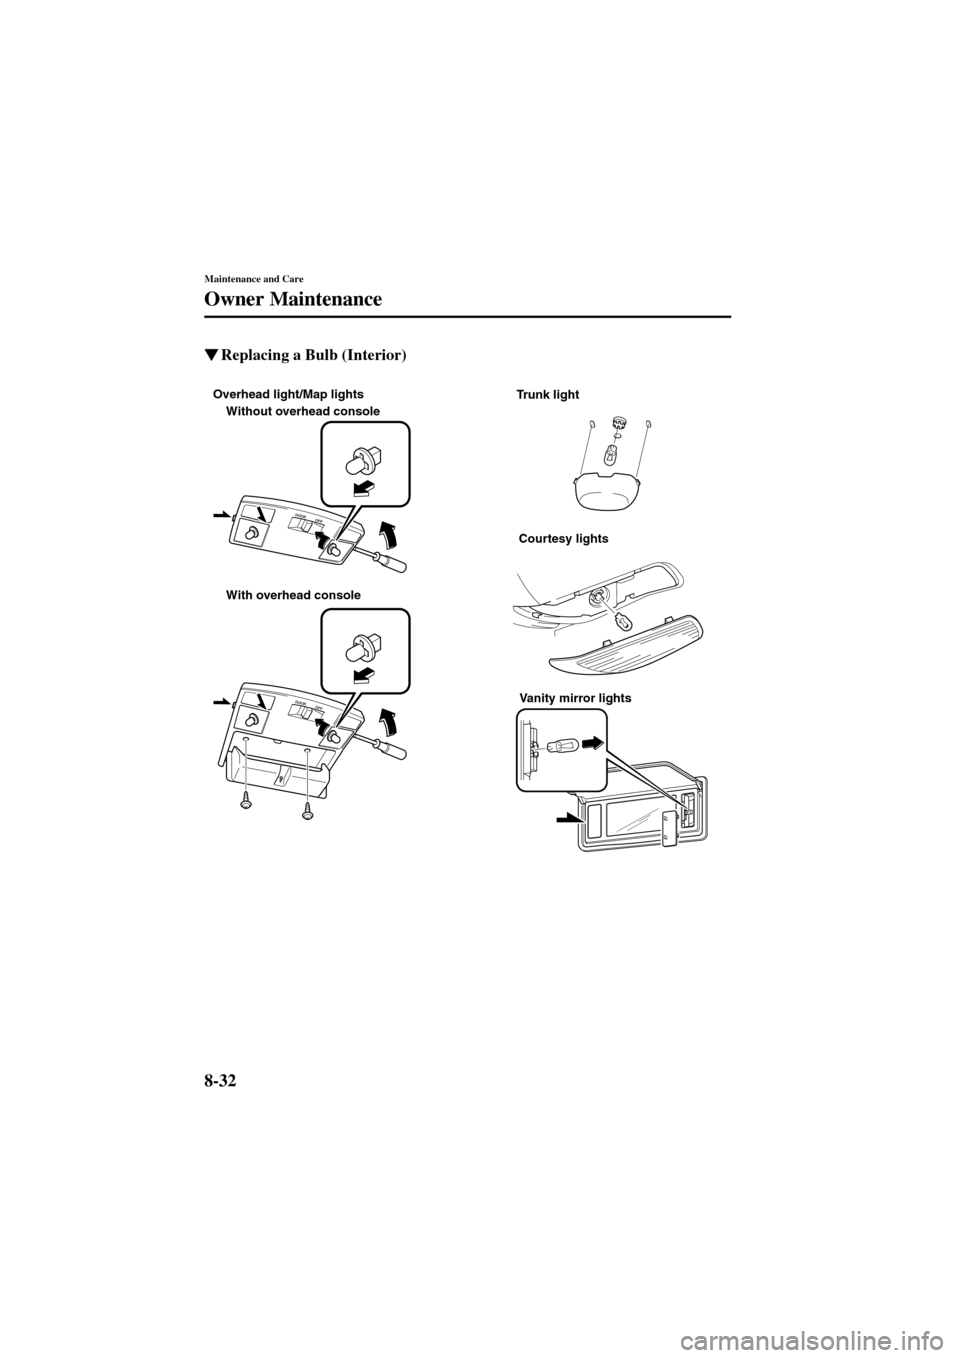 MAZDA MODEL 6 2004  Owners Manual (in English) 8-32
Maintenance and Care
Owner Maintenance
Form No. 8R29-EA-02I
Replacing a Bulb (Interior)
Without overhead console
With overhead console
Trunk light Overhead light/Map lights
Courtesy lights
Vanit